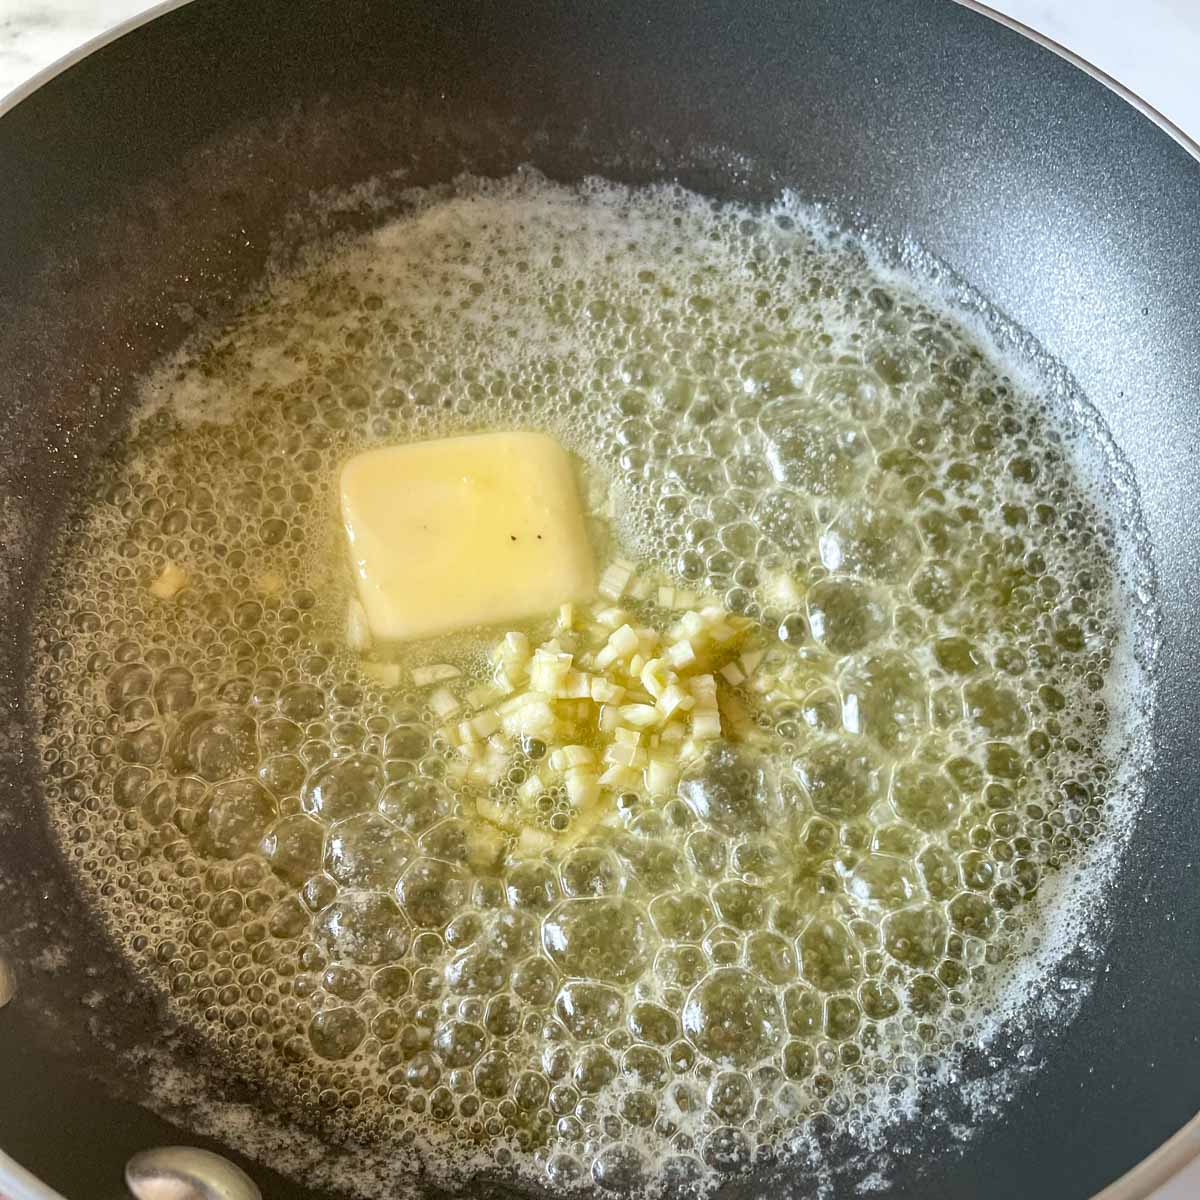 Chopped garlic is added to the melted butter in a black pan.